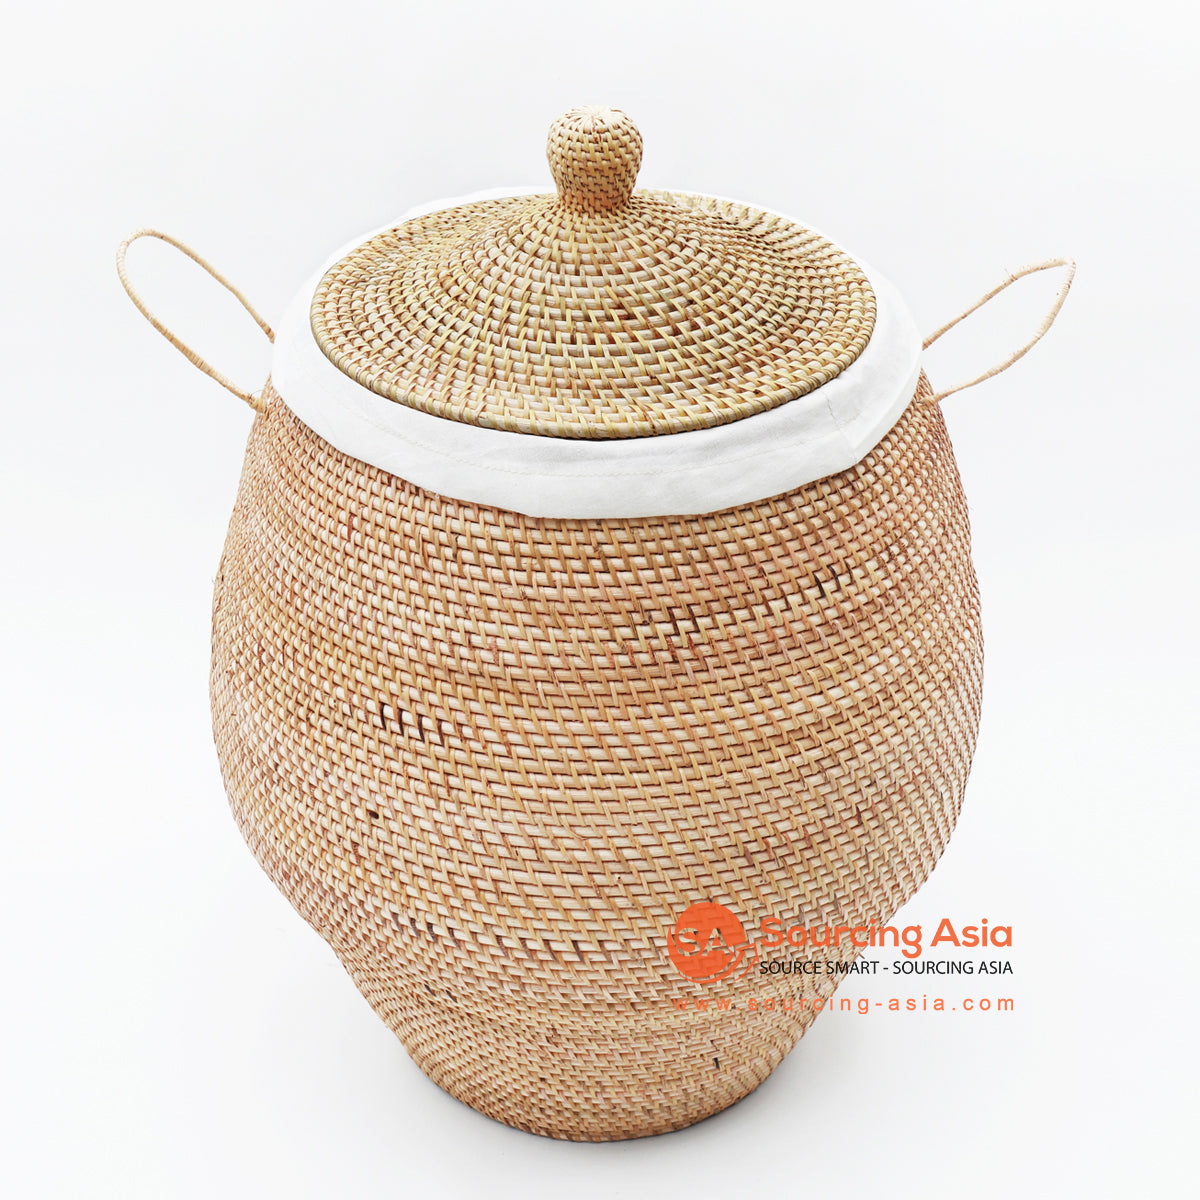 ALI080 NATURAL RATTAN LAUNDRY BASKET WITH LID AND CALICO INSIDE